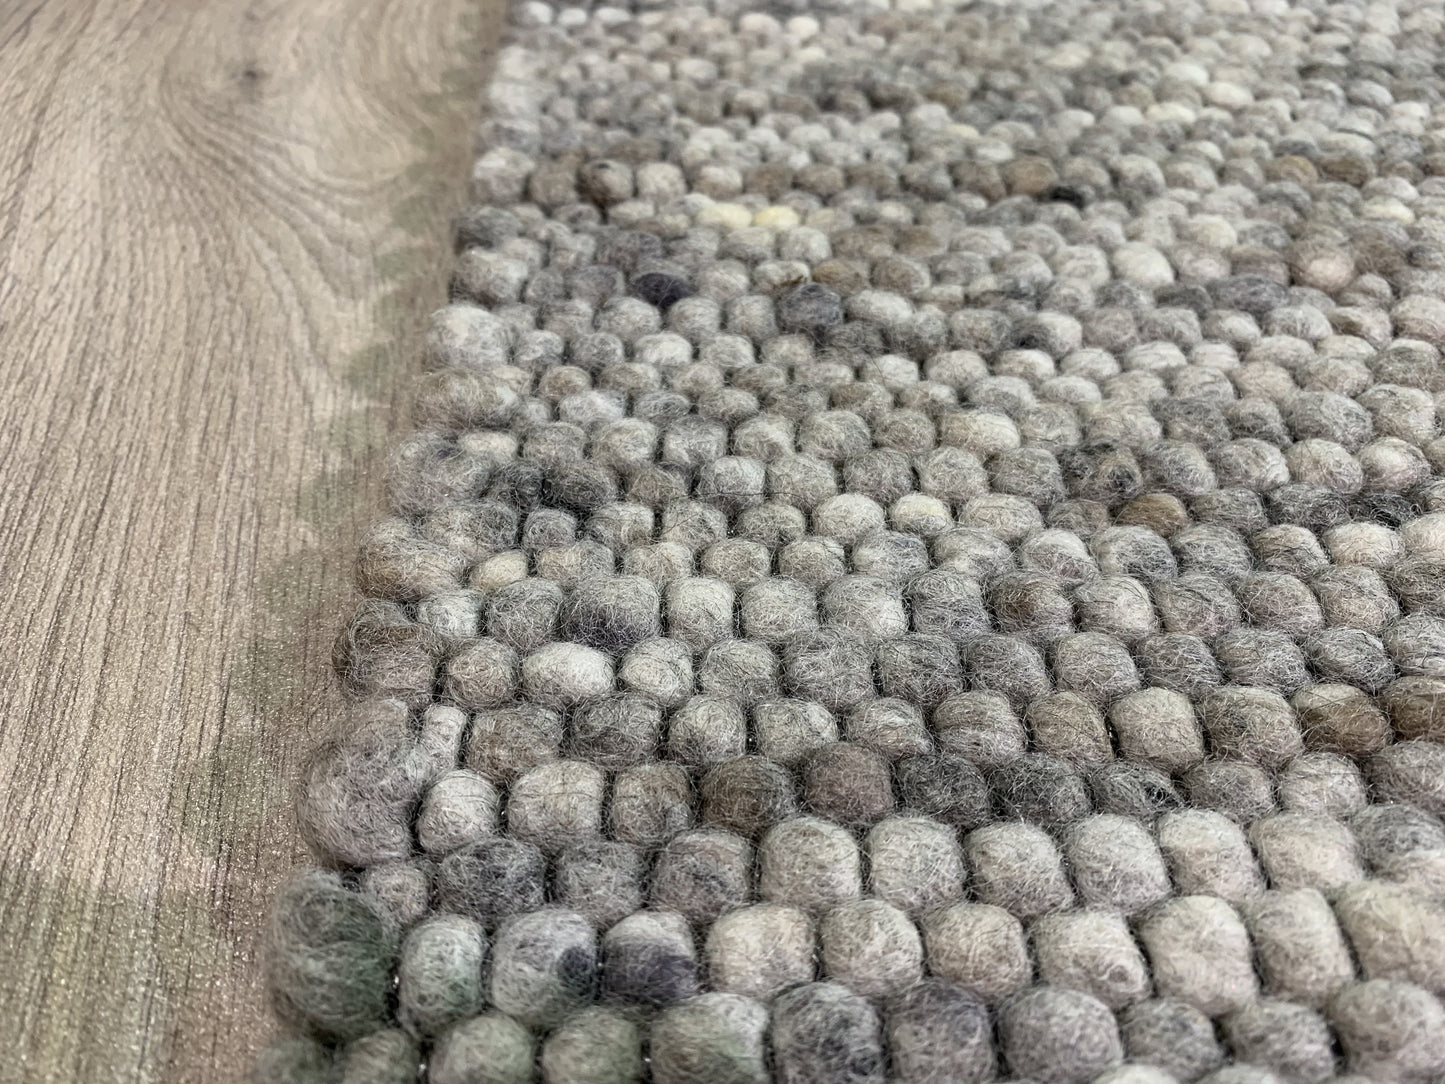 Beat: High End Wool Rug - Hand Knotted